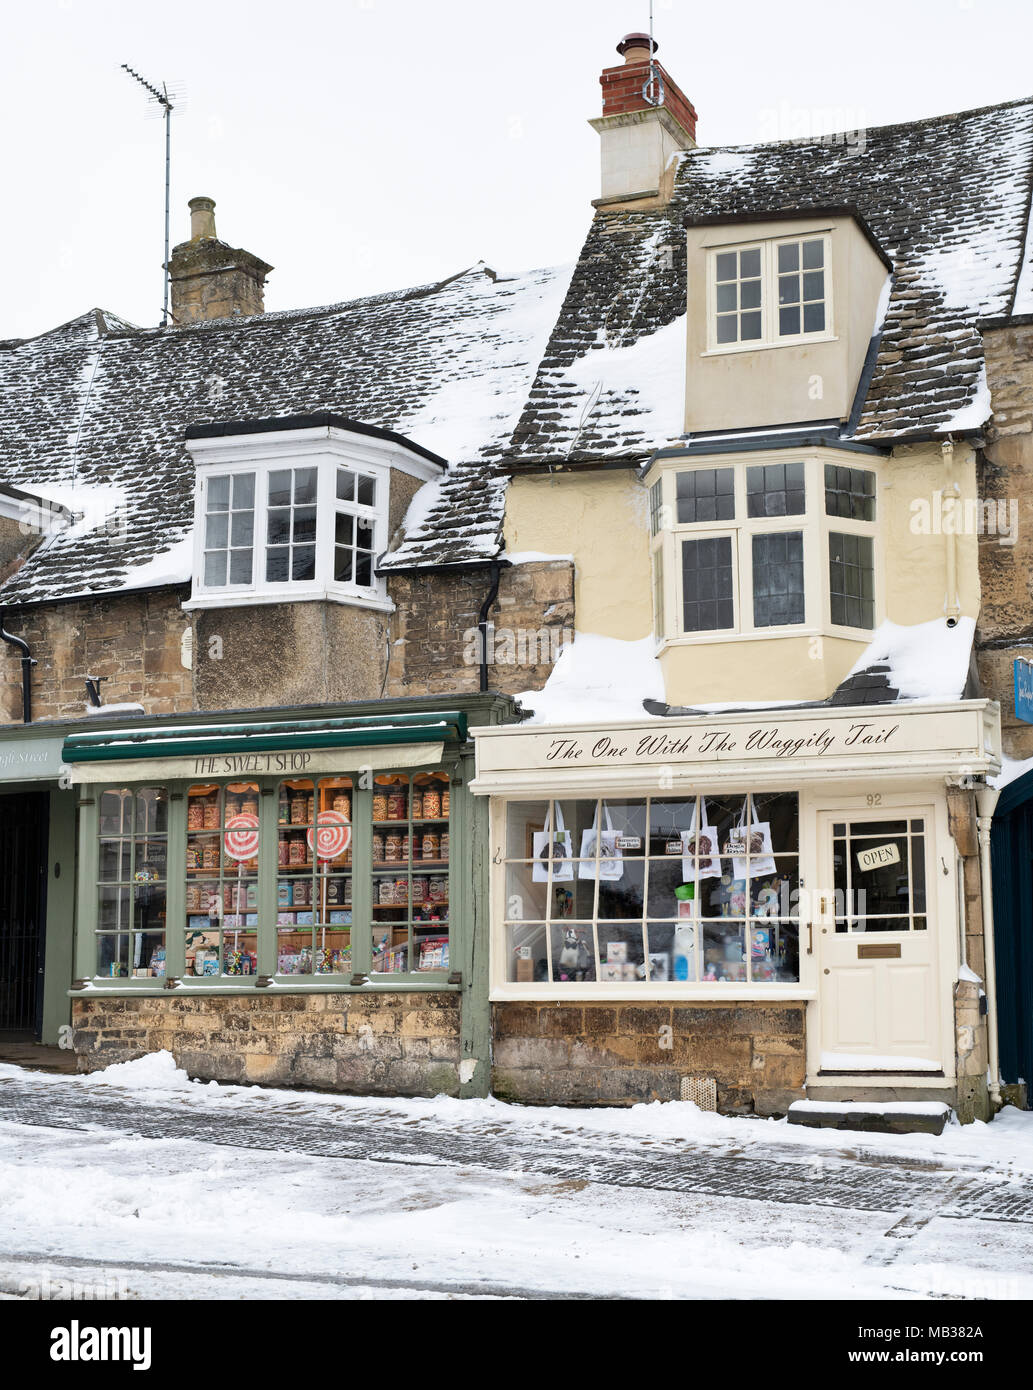 Sweet shop and pet shop on the high street in the snow. Burford, Cotswolds, Oxfordshire, England Stock Photo